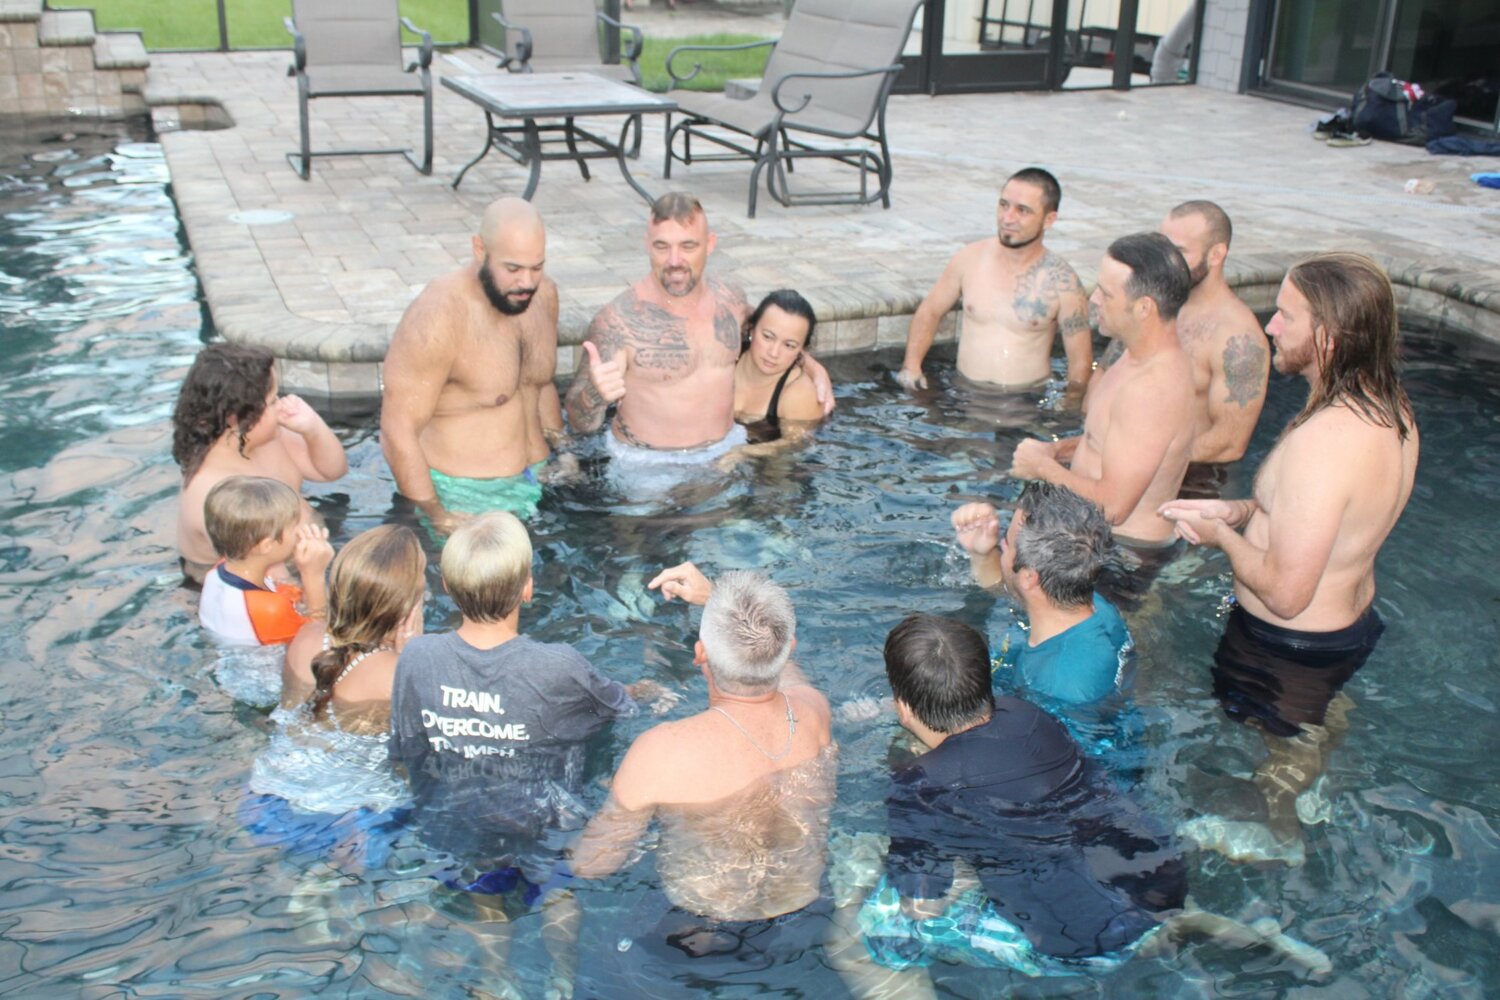 Raylan Heck, center (with wife), founder and CEO of Warrior’s Peace, teaches the group a pool lesson on balancing control and surrender to respond rather than overreact to issues during an early-morning session.